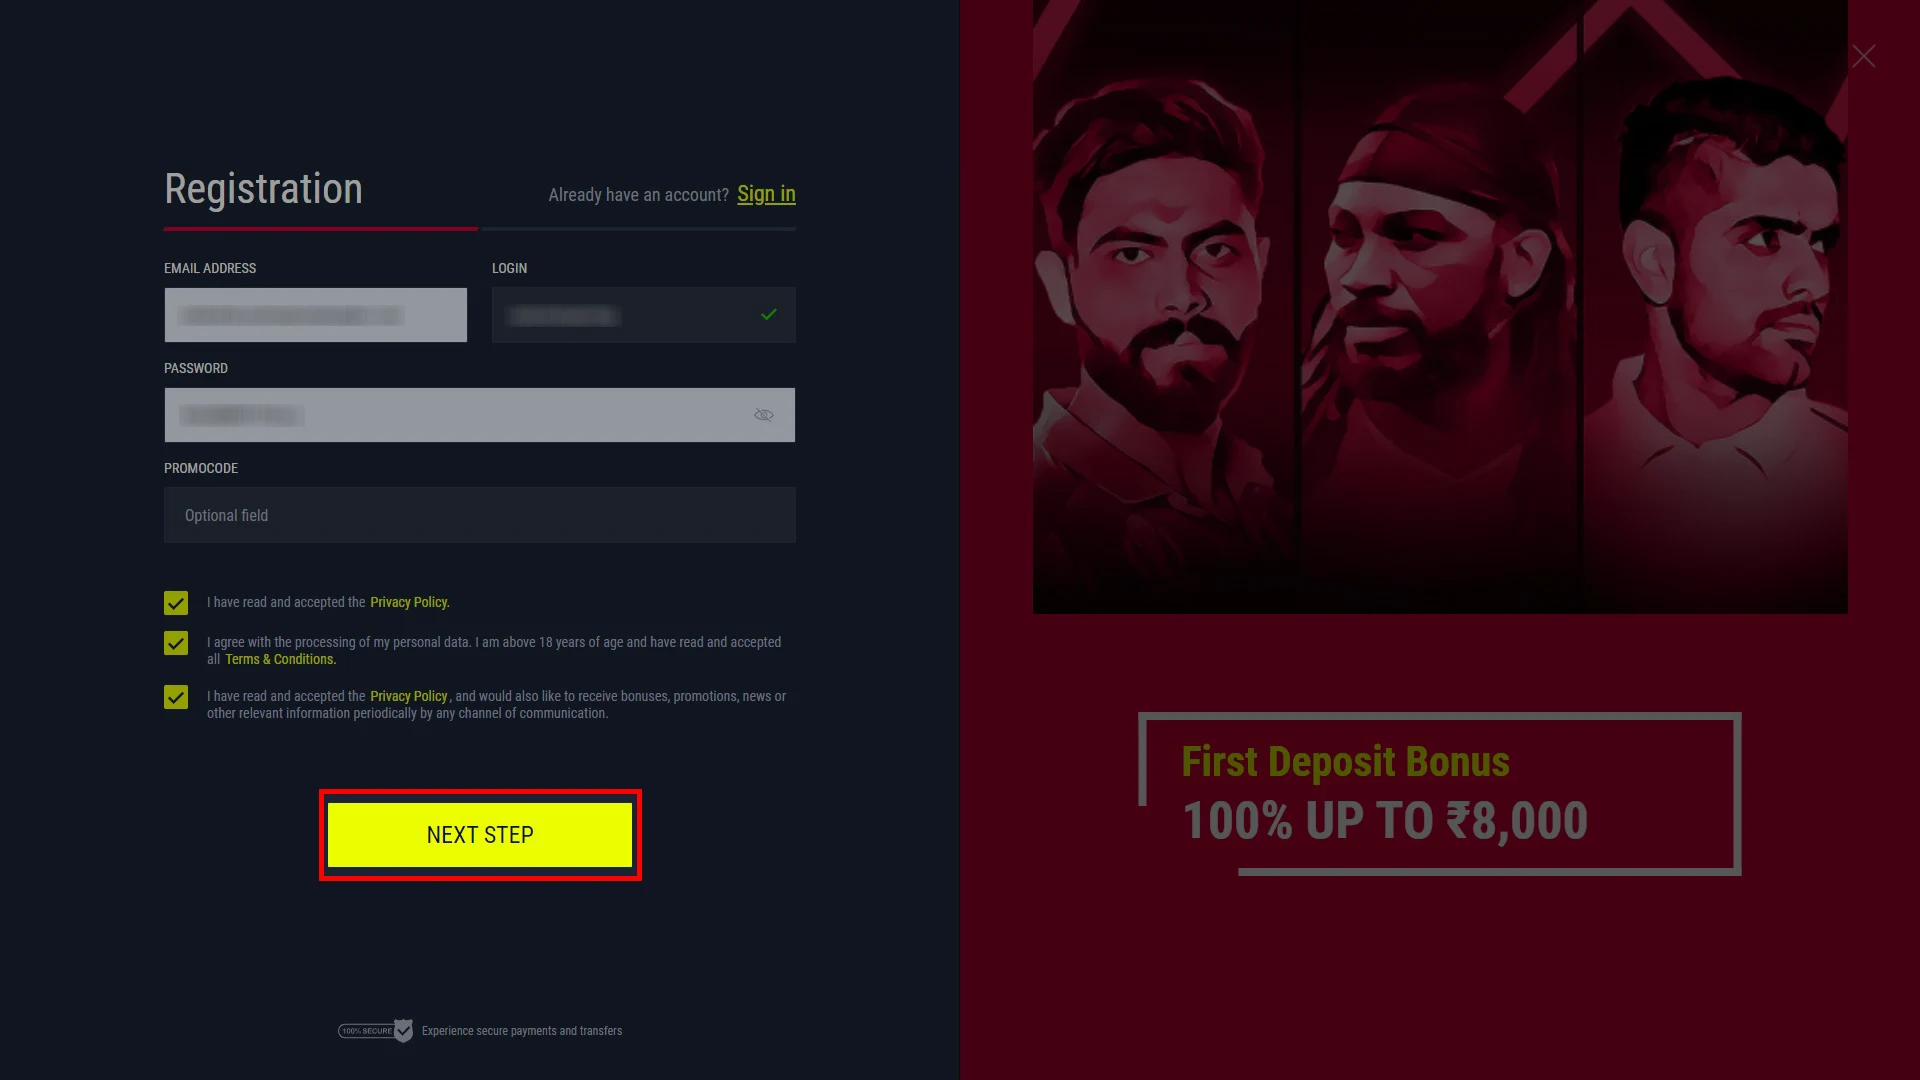 Complete the form and create an account on the Rabona website.